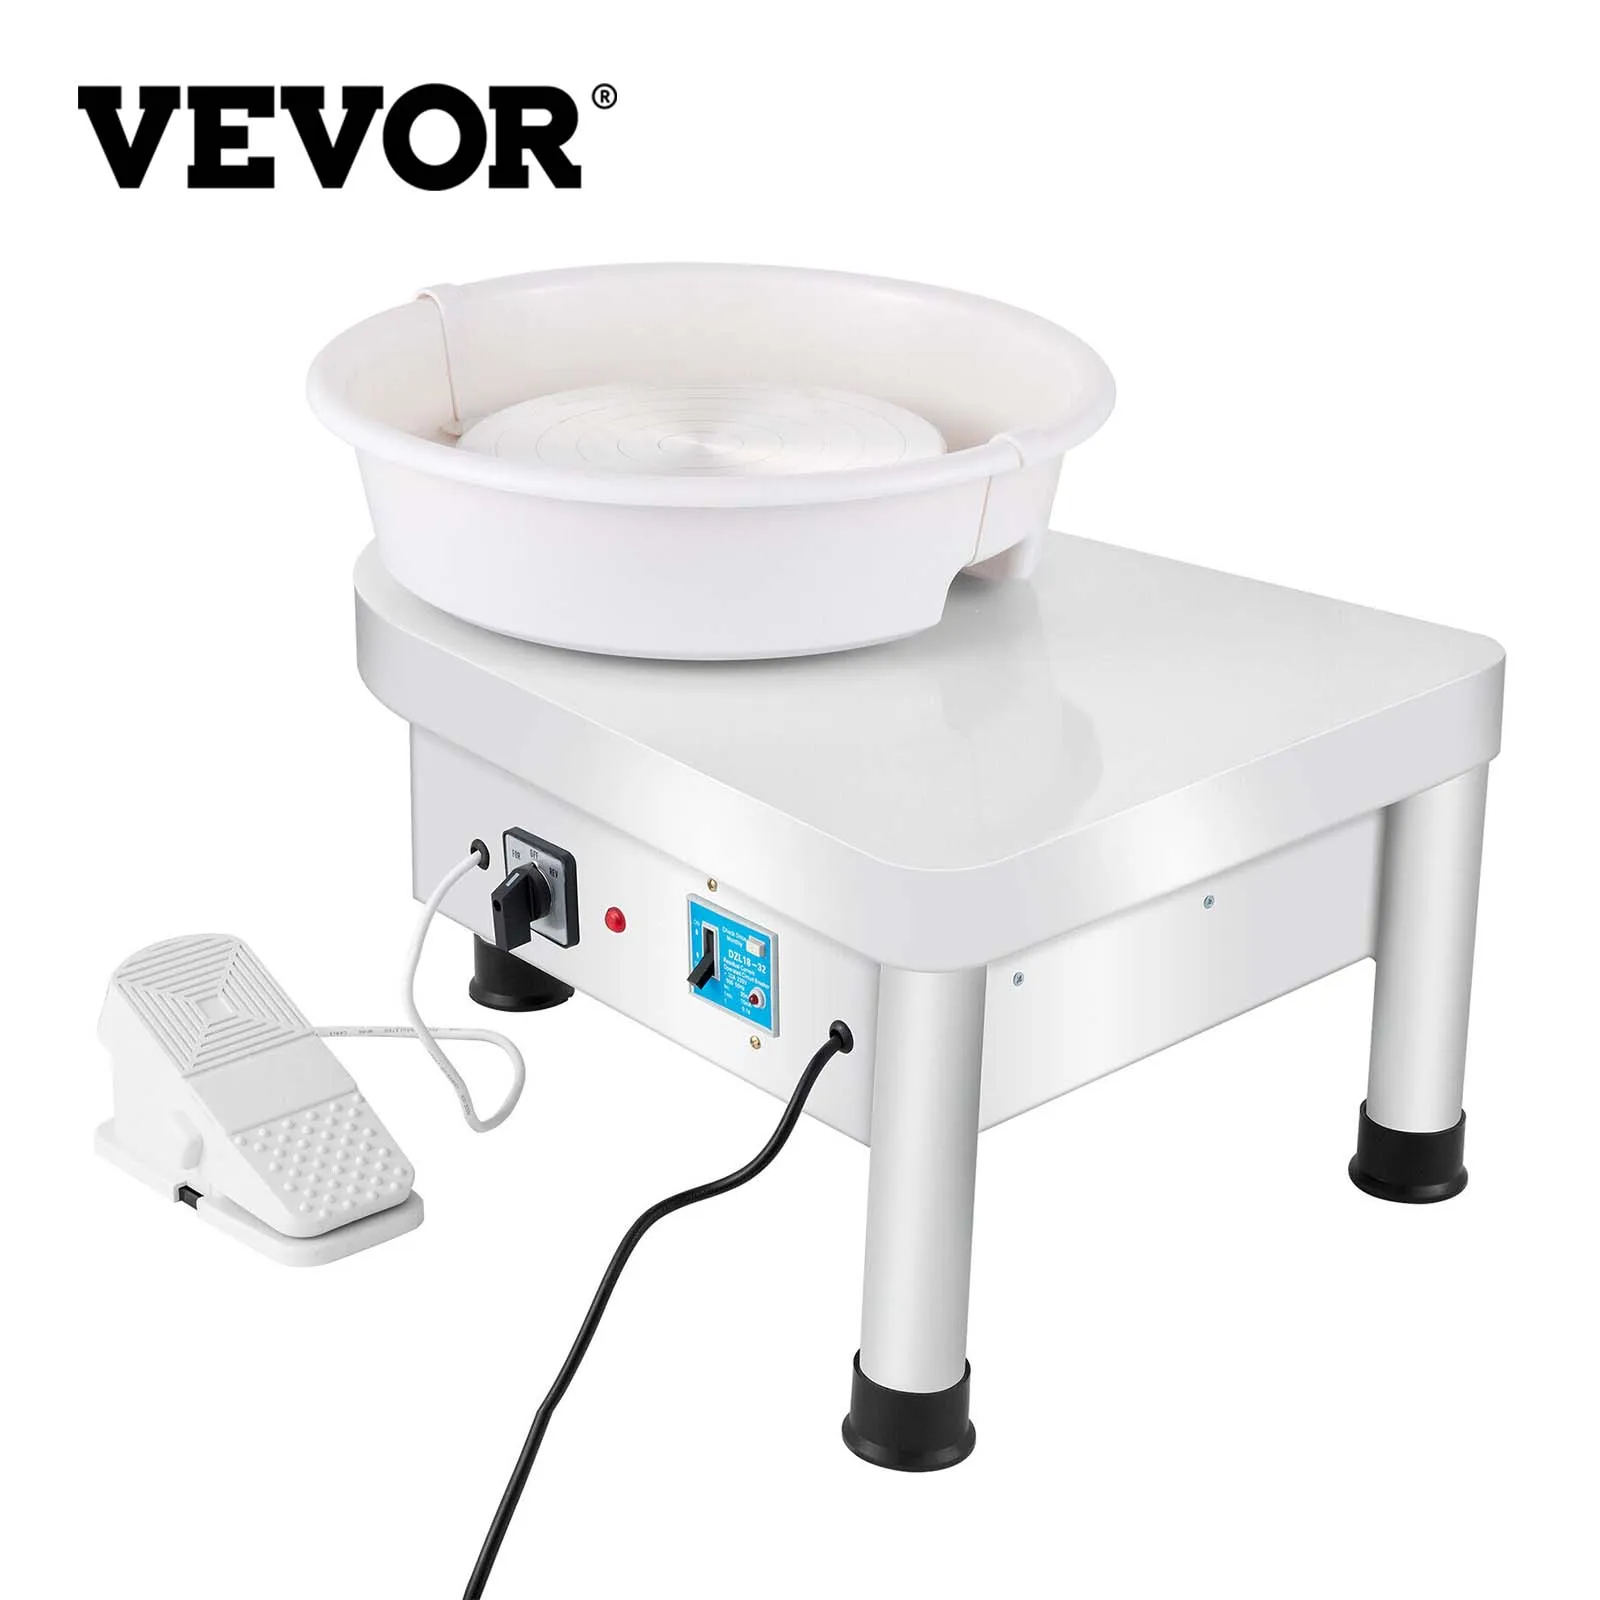 VEVOR Electric Pottery Wheel Machine 25CM 280W With Foot Pedal and Detachable Basin Shaping Tool Set For Ceramics Clay